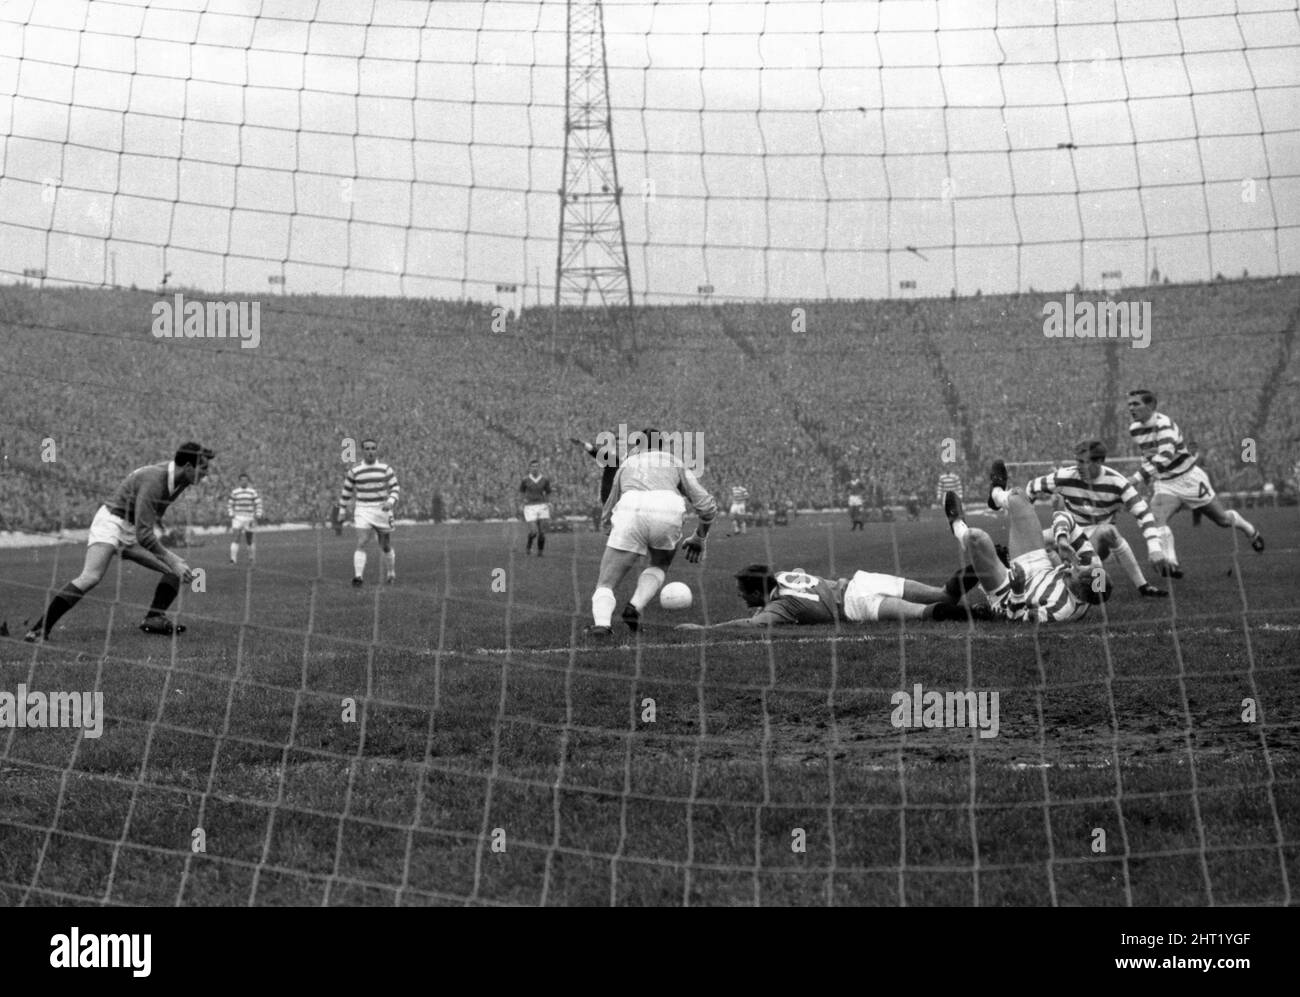 Celtic 1-0 Rangers, Scottish League Cup Final, Hampden Park, Glasgow, Scotland, Saturday 29th October 1966. No penalty, referee Tom ¿y¿harton waves play on as Rangers Alex Smith lies sprawled in the Celtic goalmouth with the Celtic defence in a tangle. Stock Photo